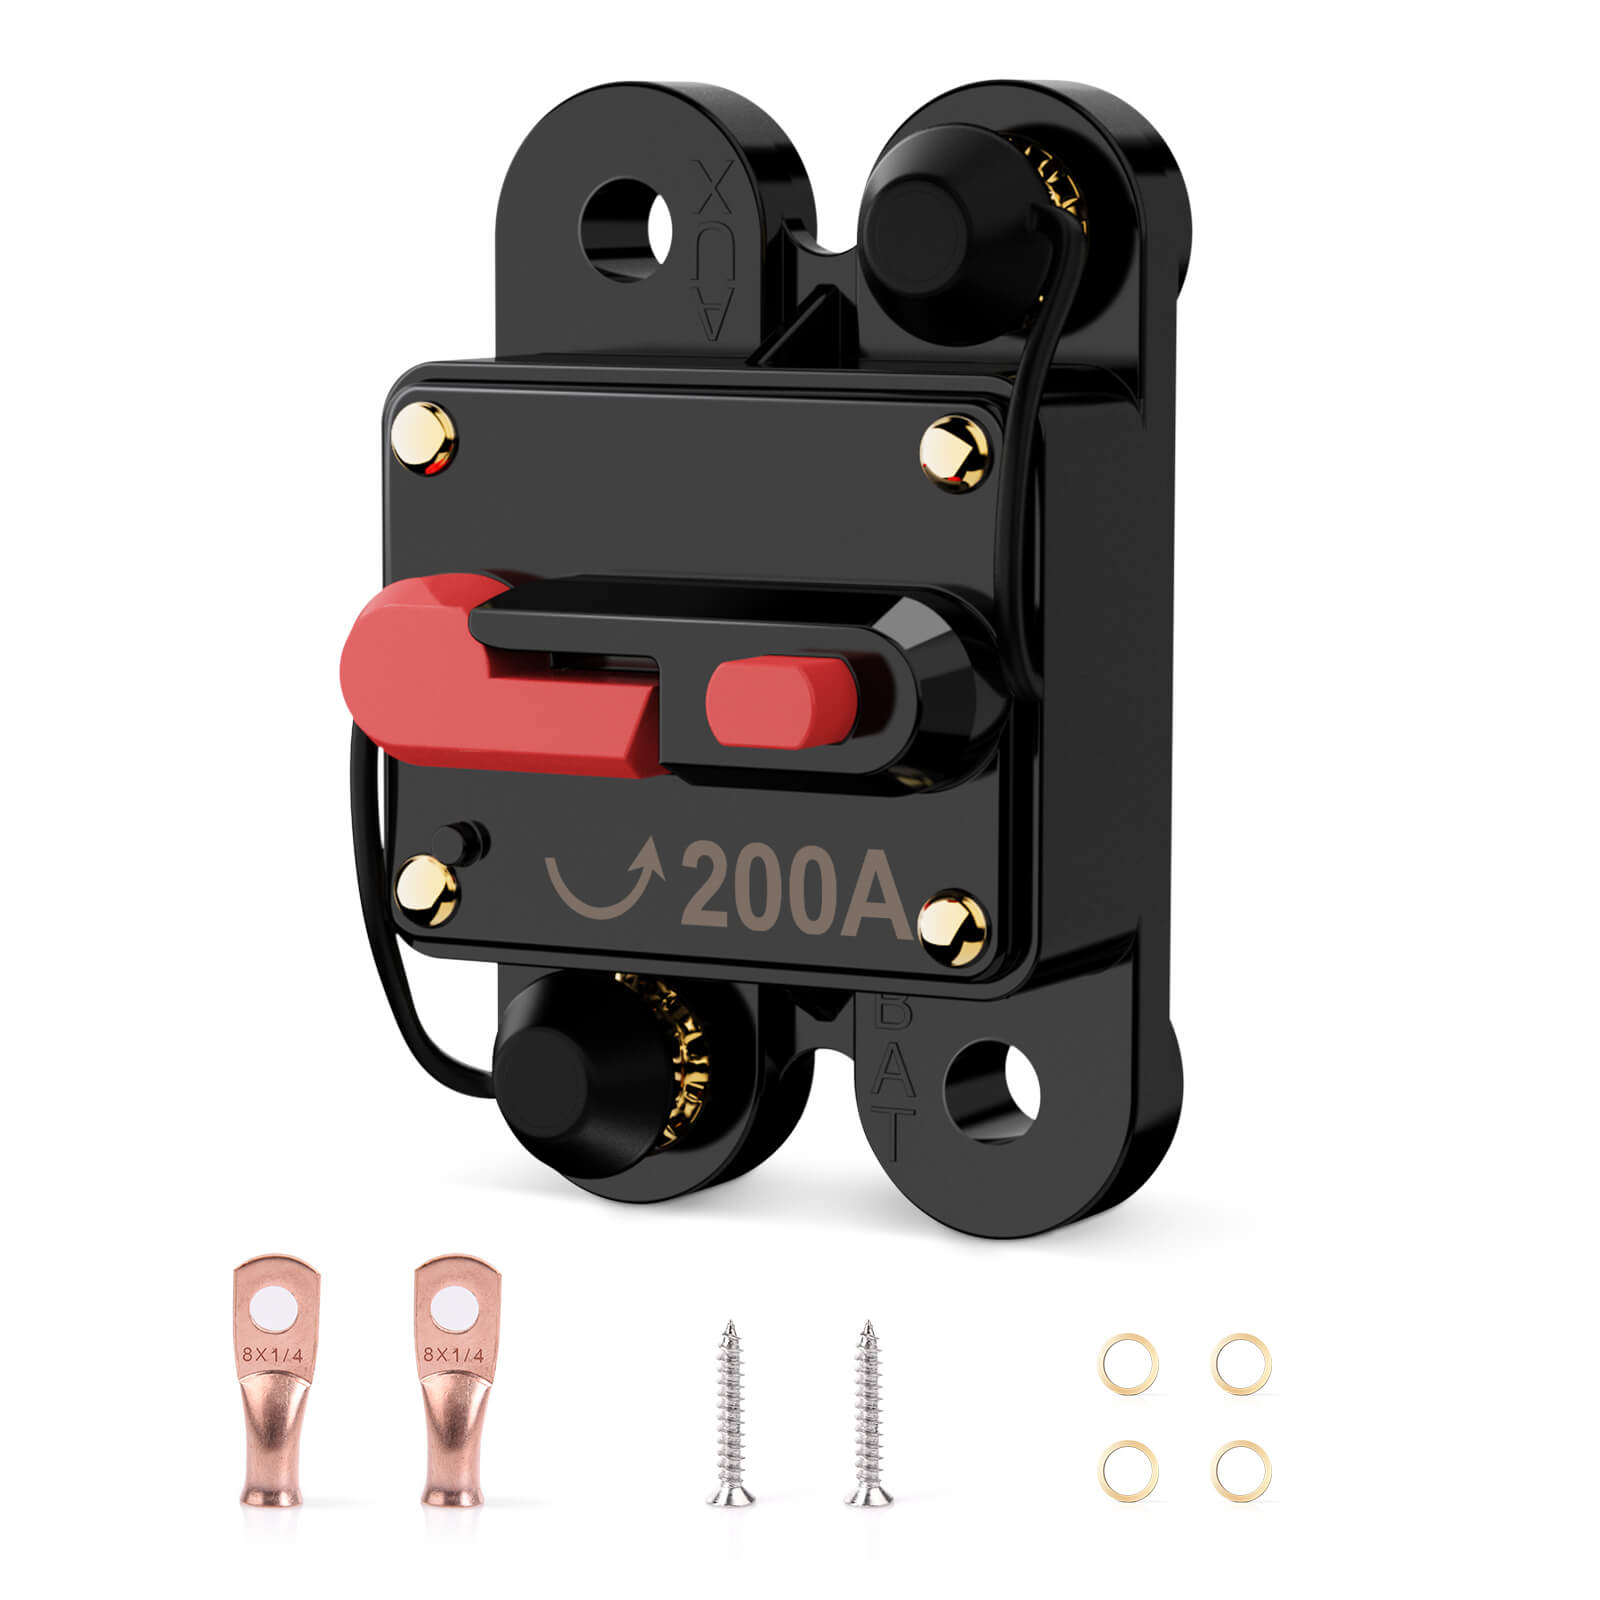 60/80/100/200 Amp Circuit Breaker with Manual Reset Switch, Waterproof Protective Cover